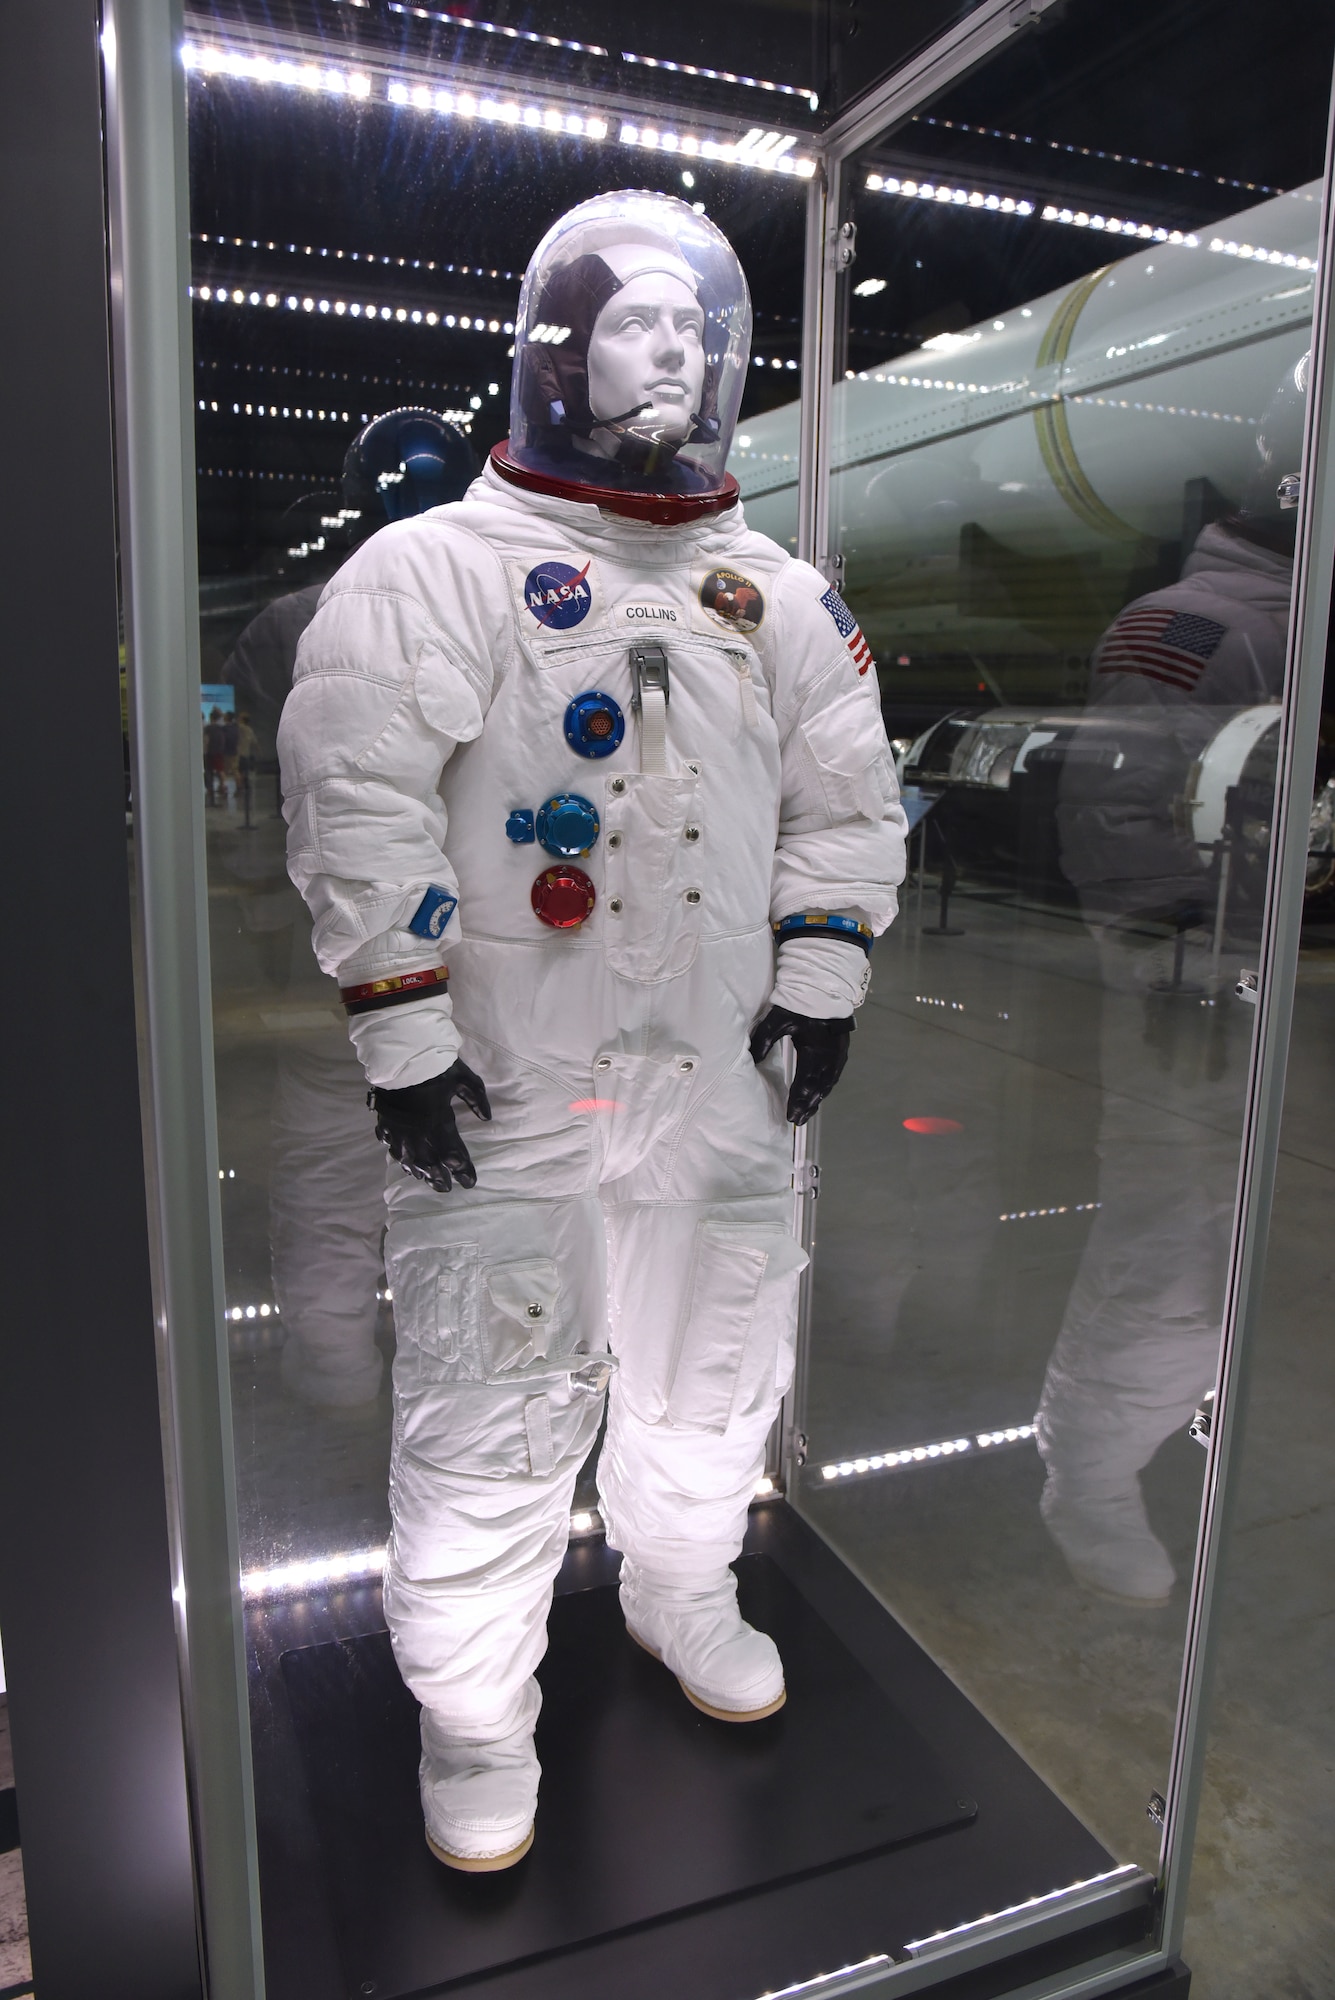 This suit represents the model A7L worn by U.S. Air Force Col. (later Maj. Gen.) Michael Collins in July 1969 on Apollo 11, the first moon landing mission. (U.S. Air Force photo by Ken LaRock)